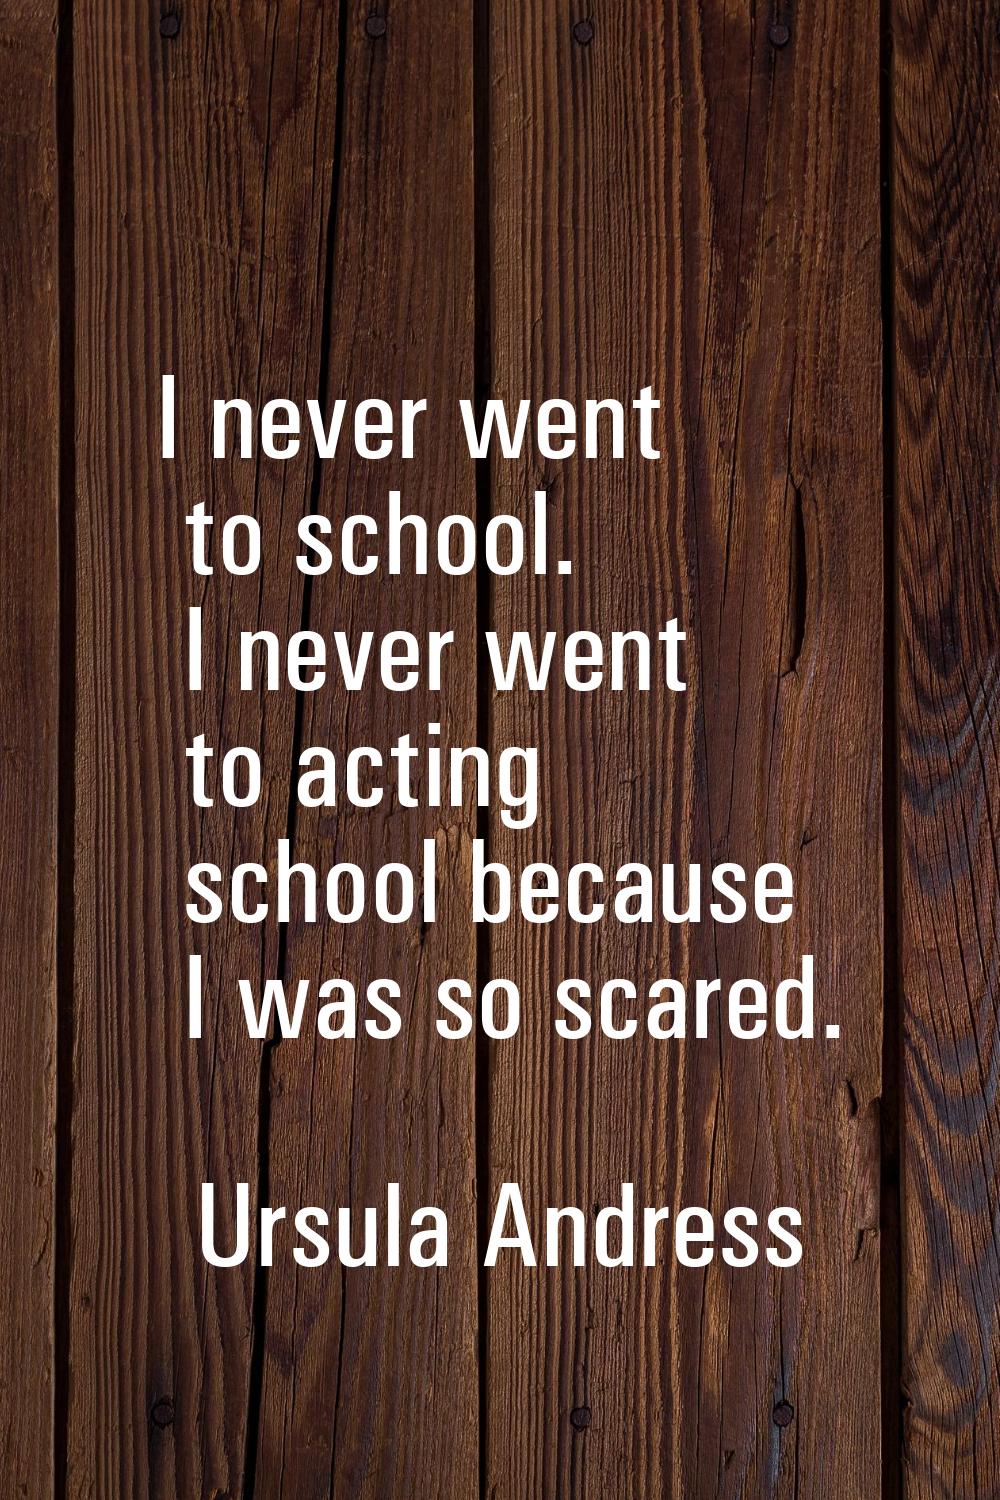 I never went to school. I never went to acting school because I was so scared.